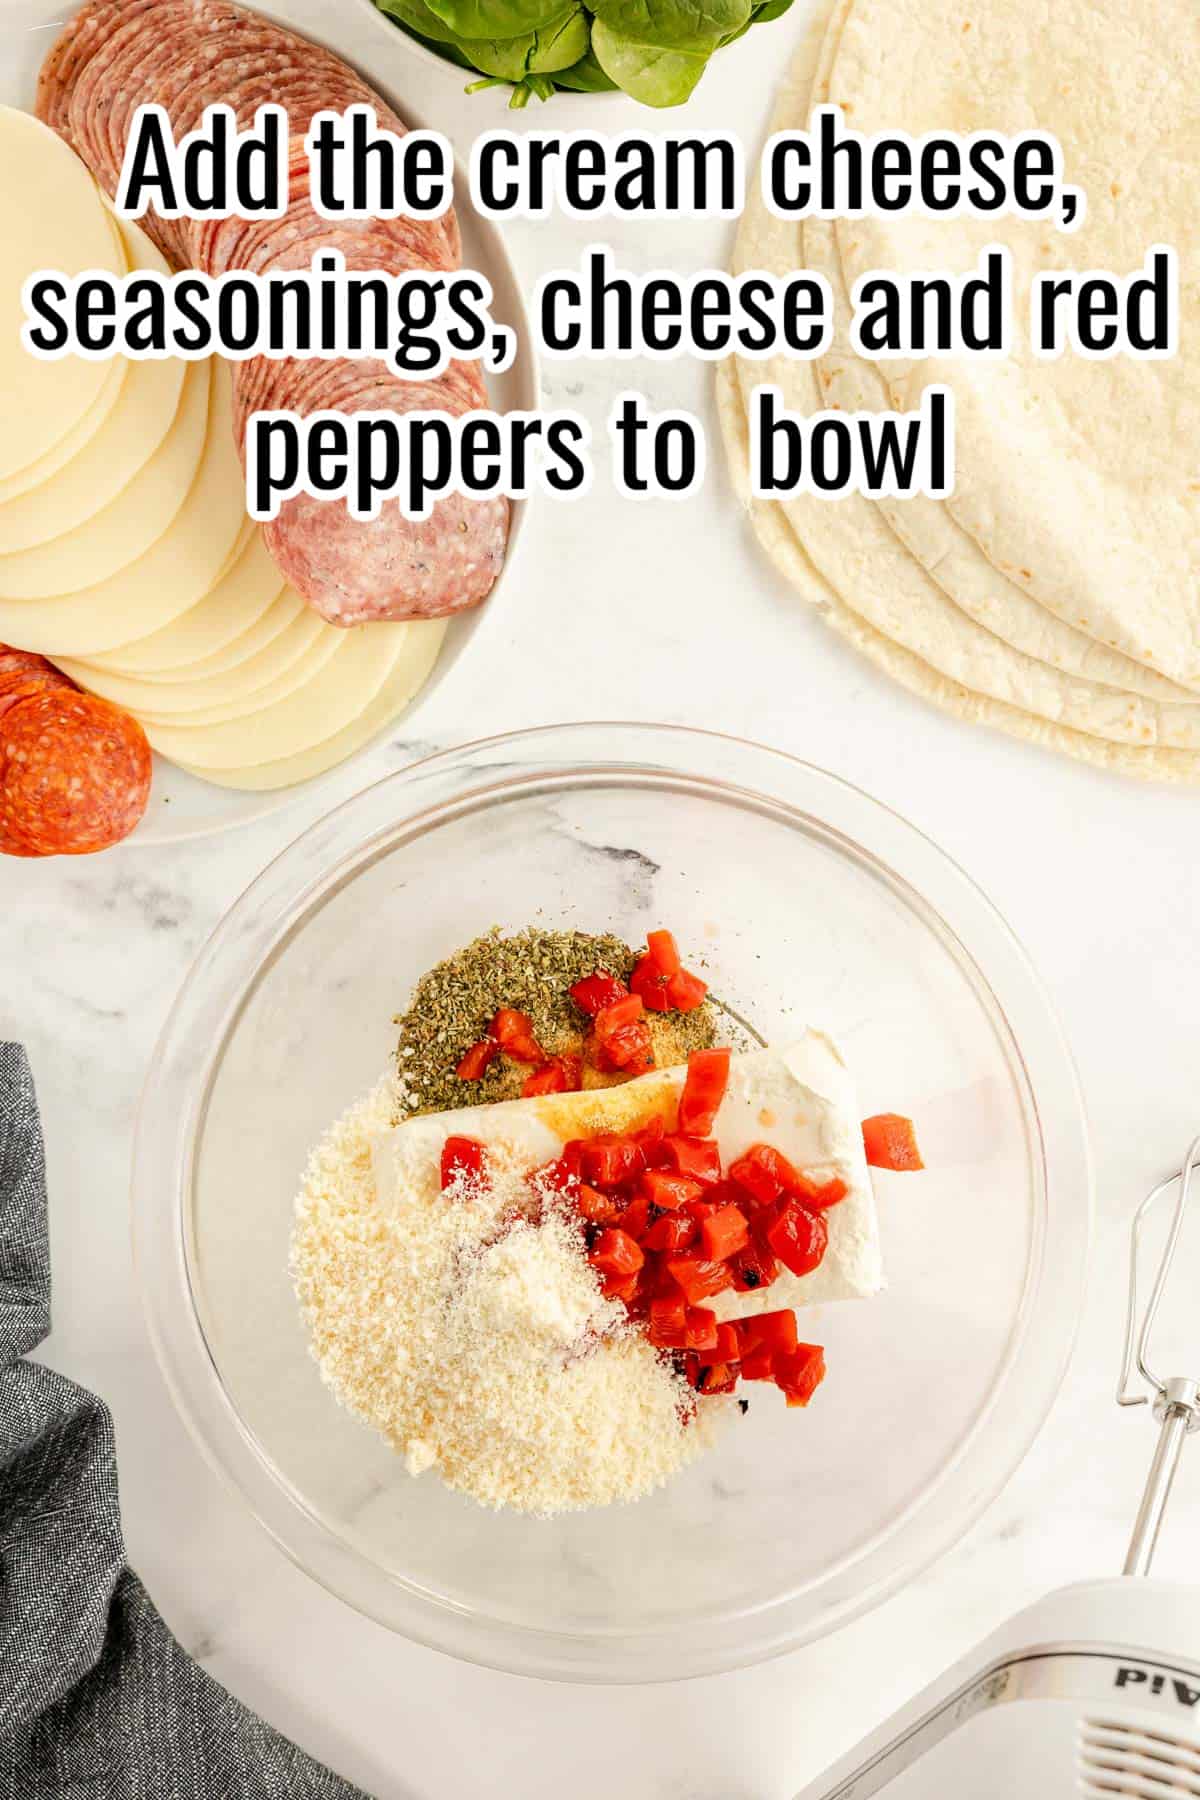 A bowl of cream cheese, seasonings, cheese and roasted red peppers in it.